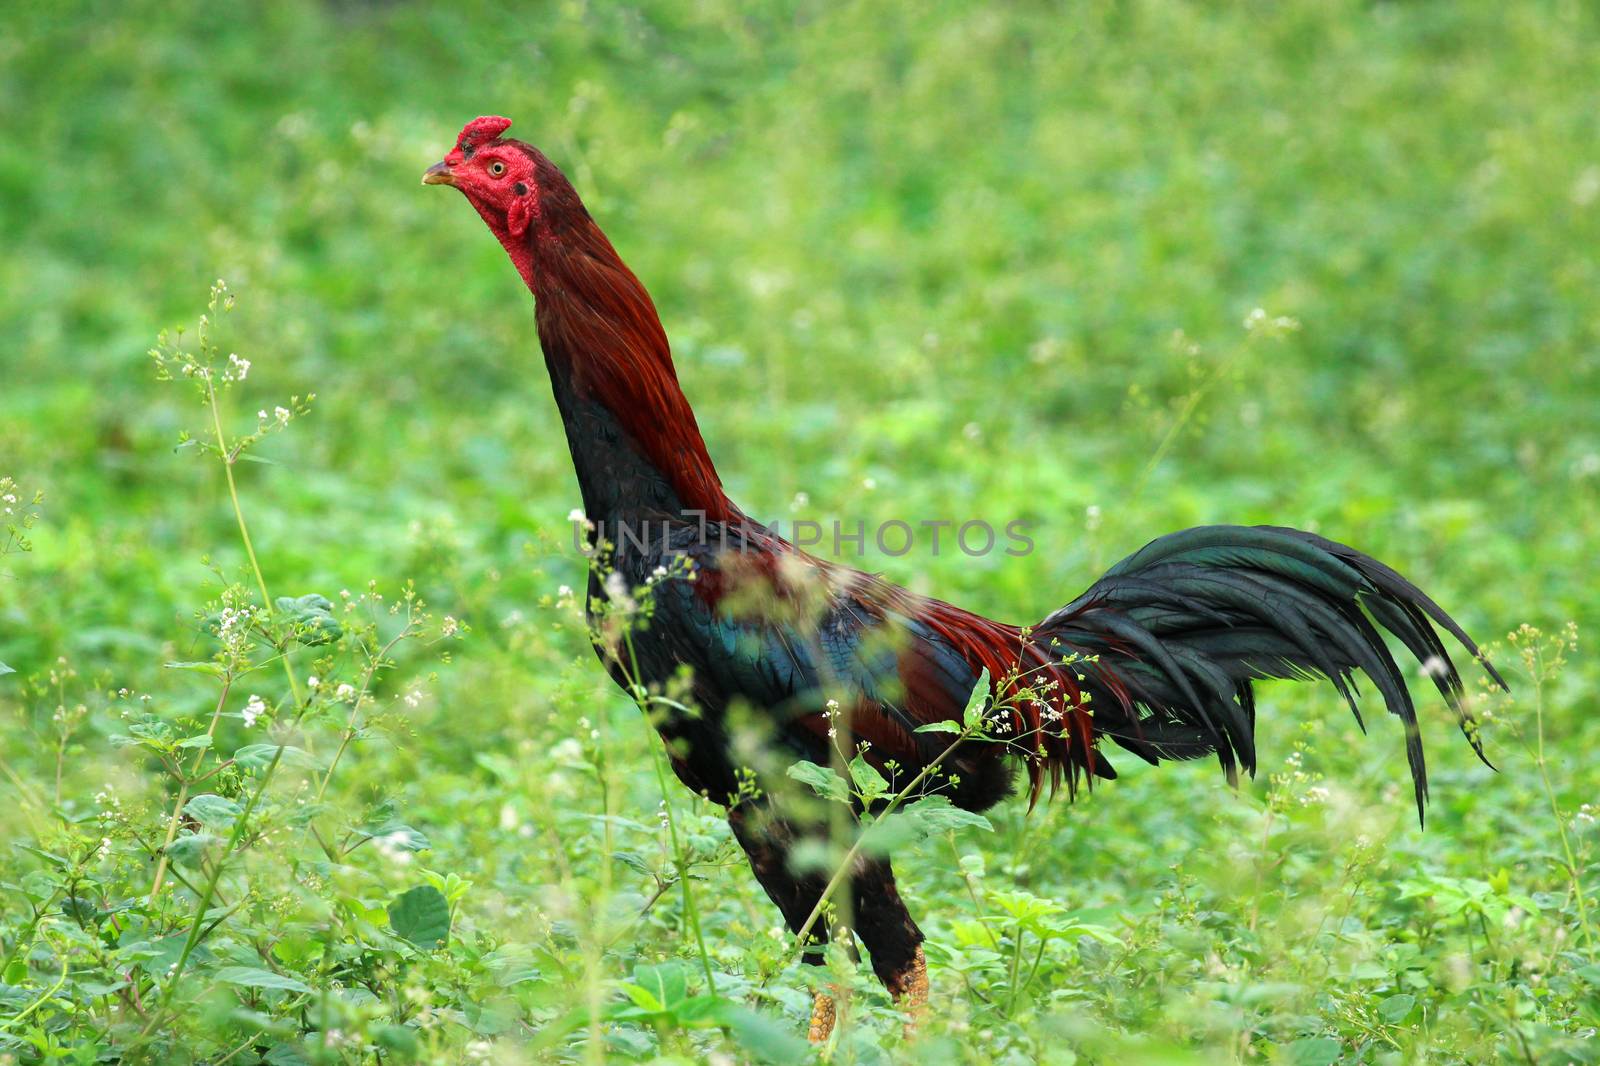 Image of rooster in green field.